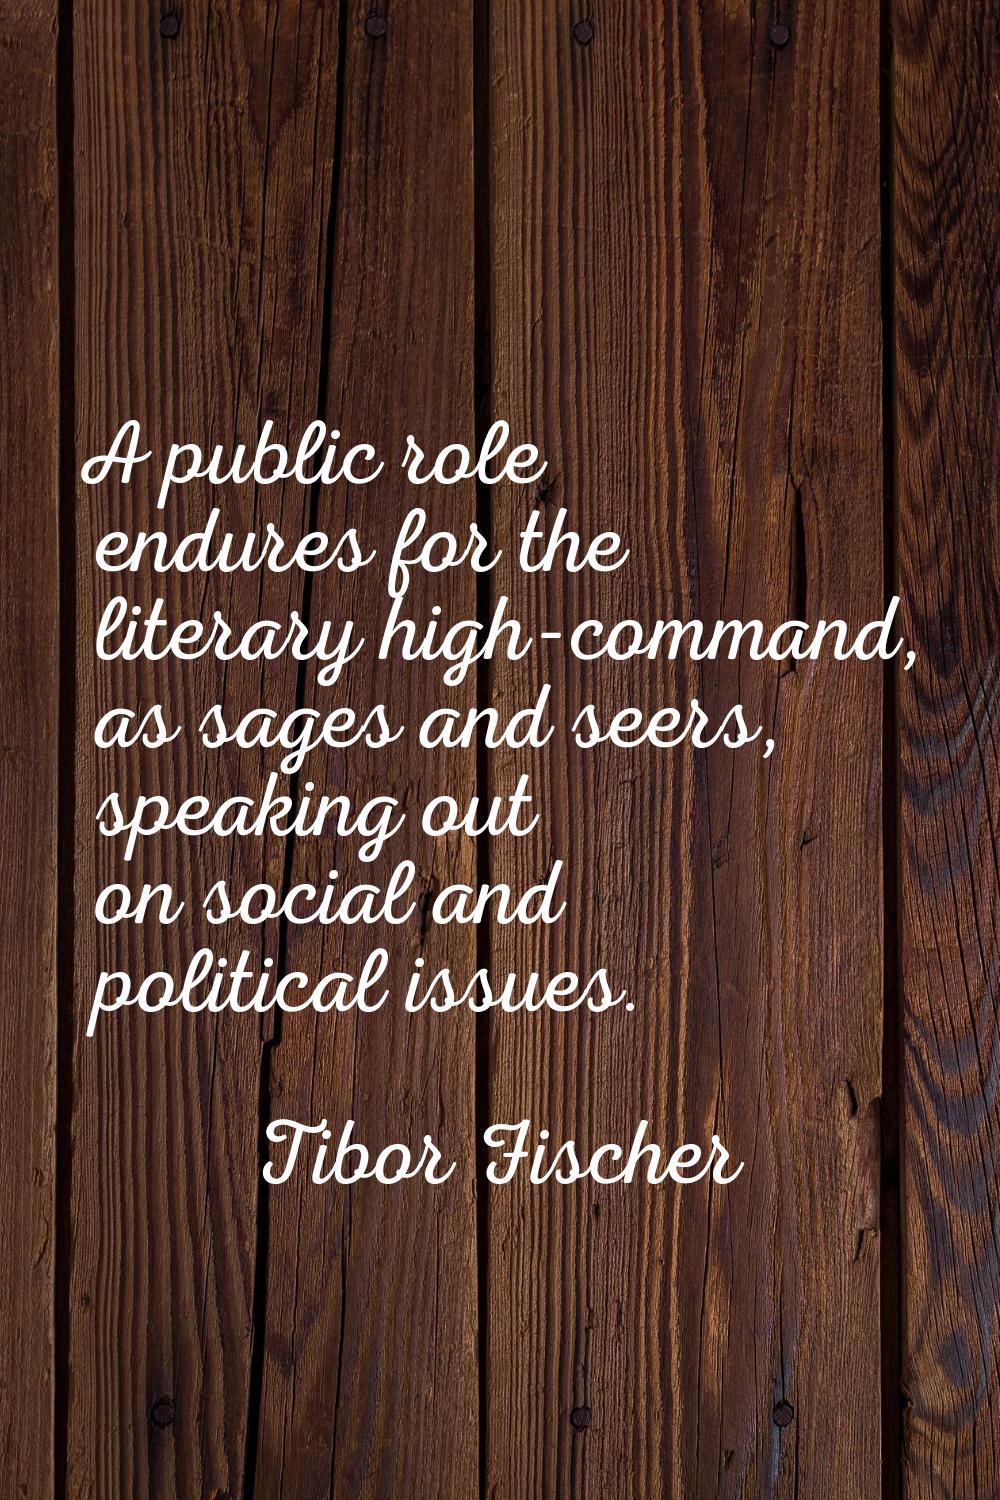 A public role endures for the literary high-command, as sages and seers, speaking out on social and